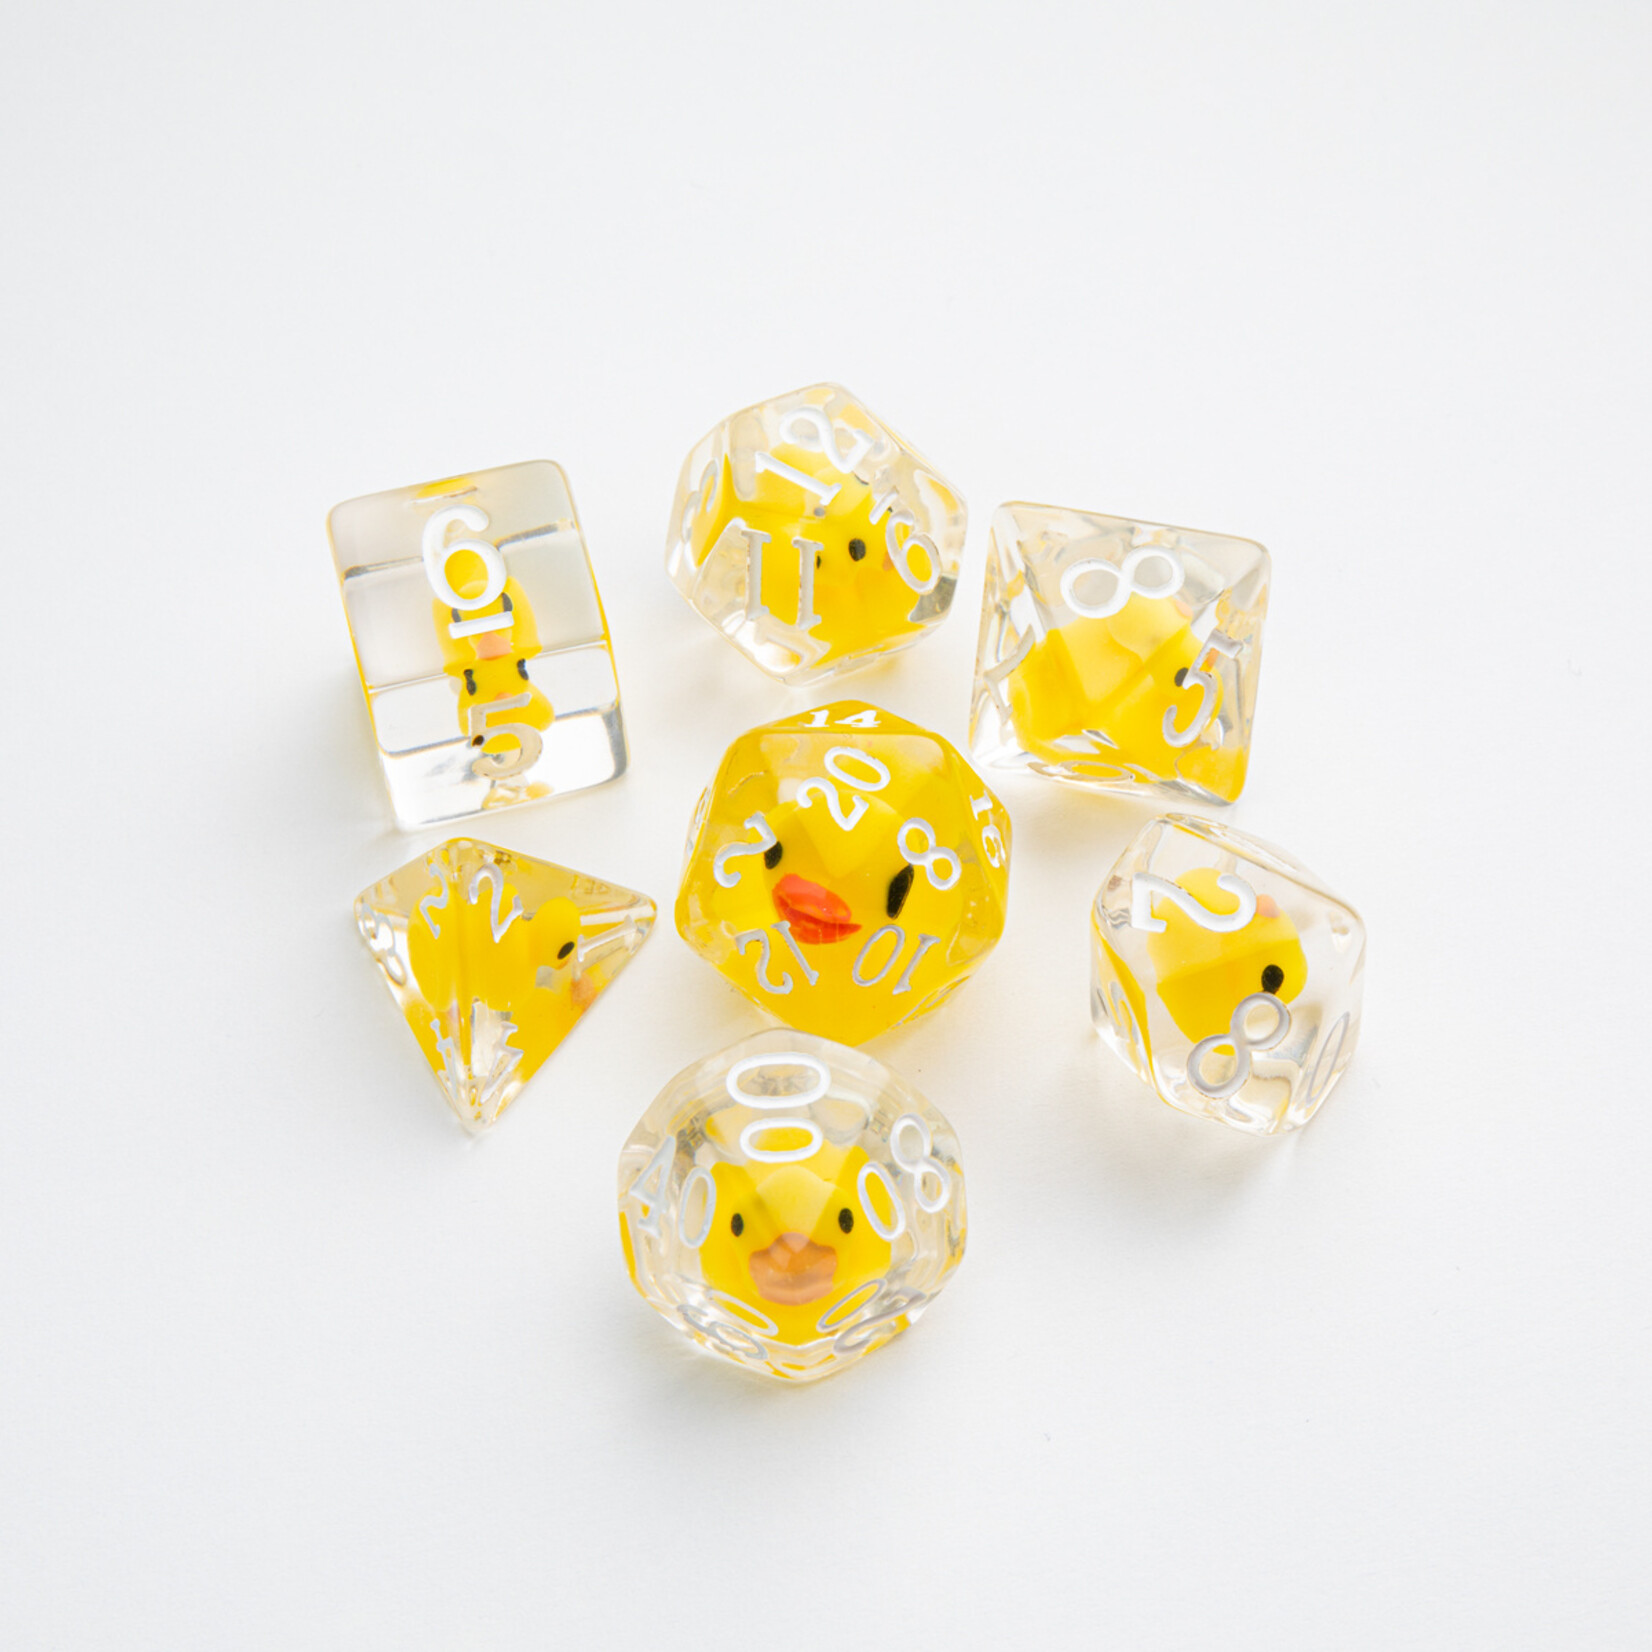 Gamegenic Gamegenic RPG Dice Set Embraced Series: Rubber Duck